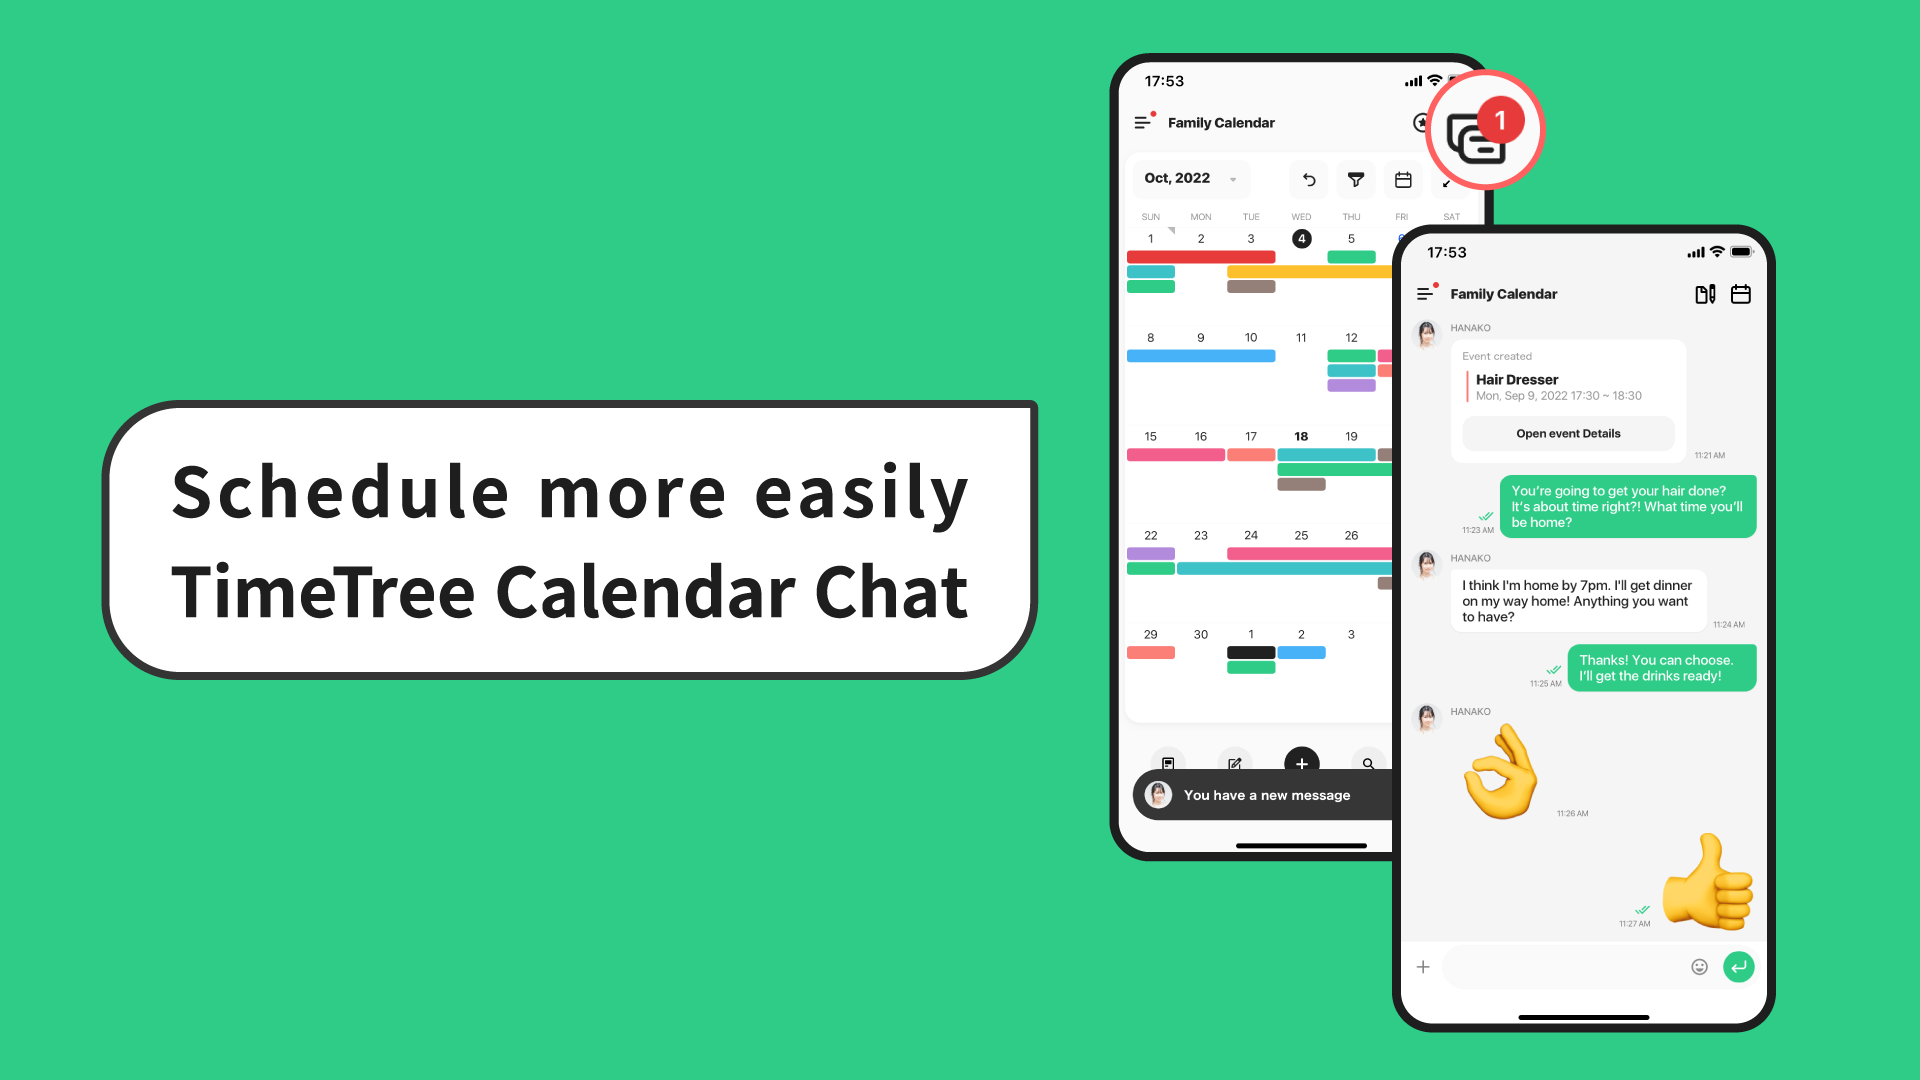 New TimeTree Calendar Chat is available for testing in a limited number